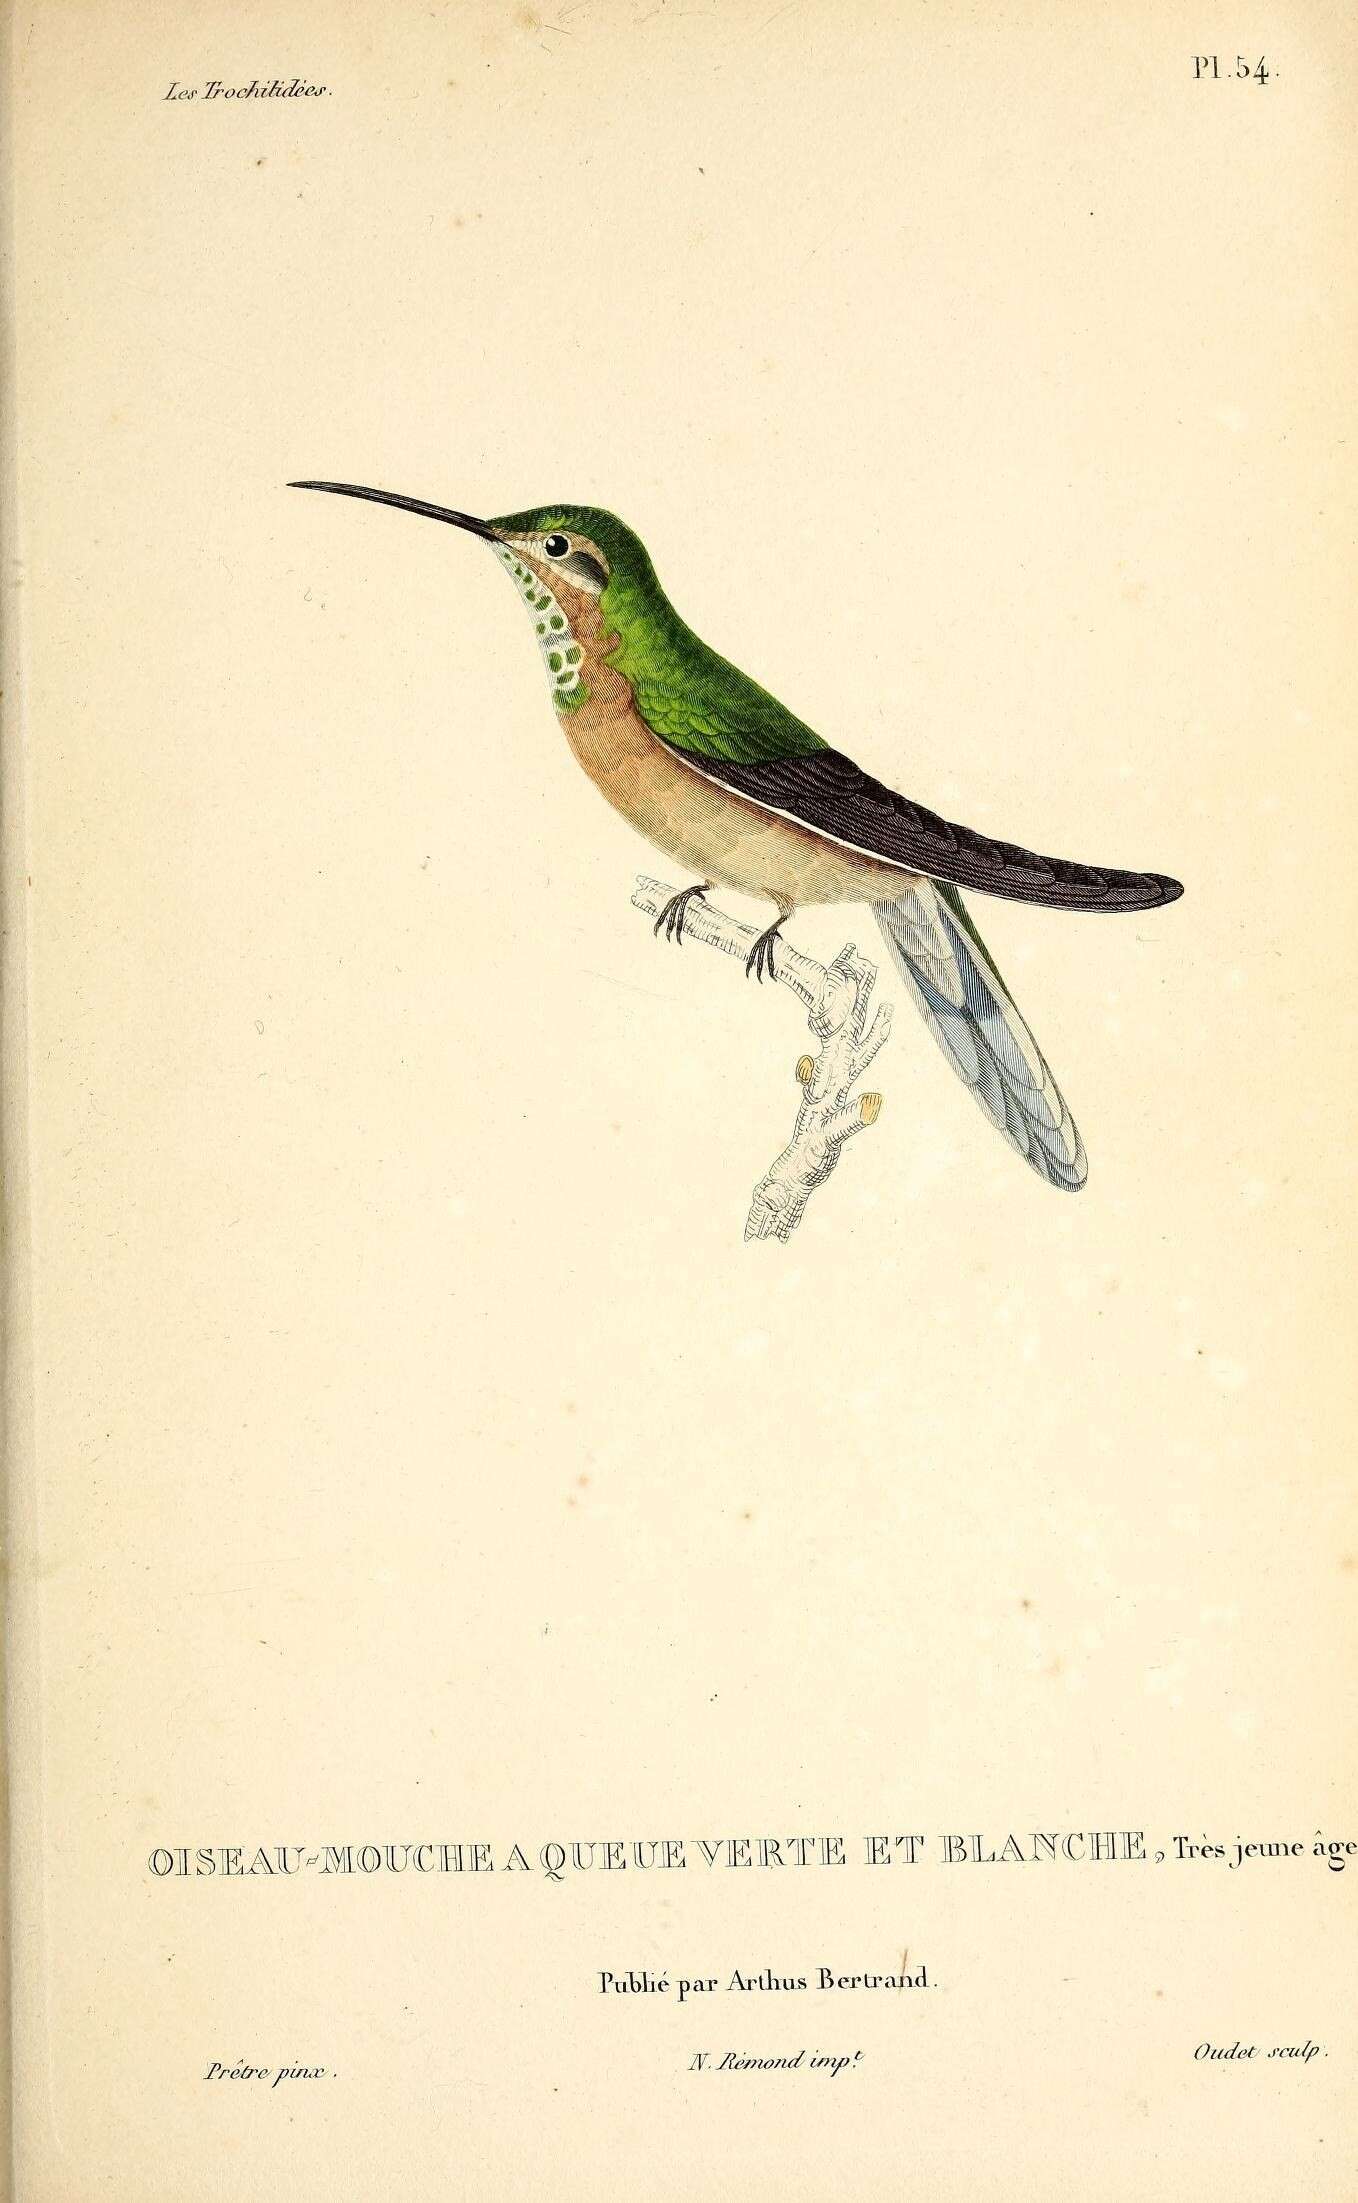 Image of White-tailed Goldenthroat